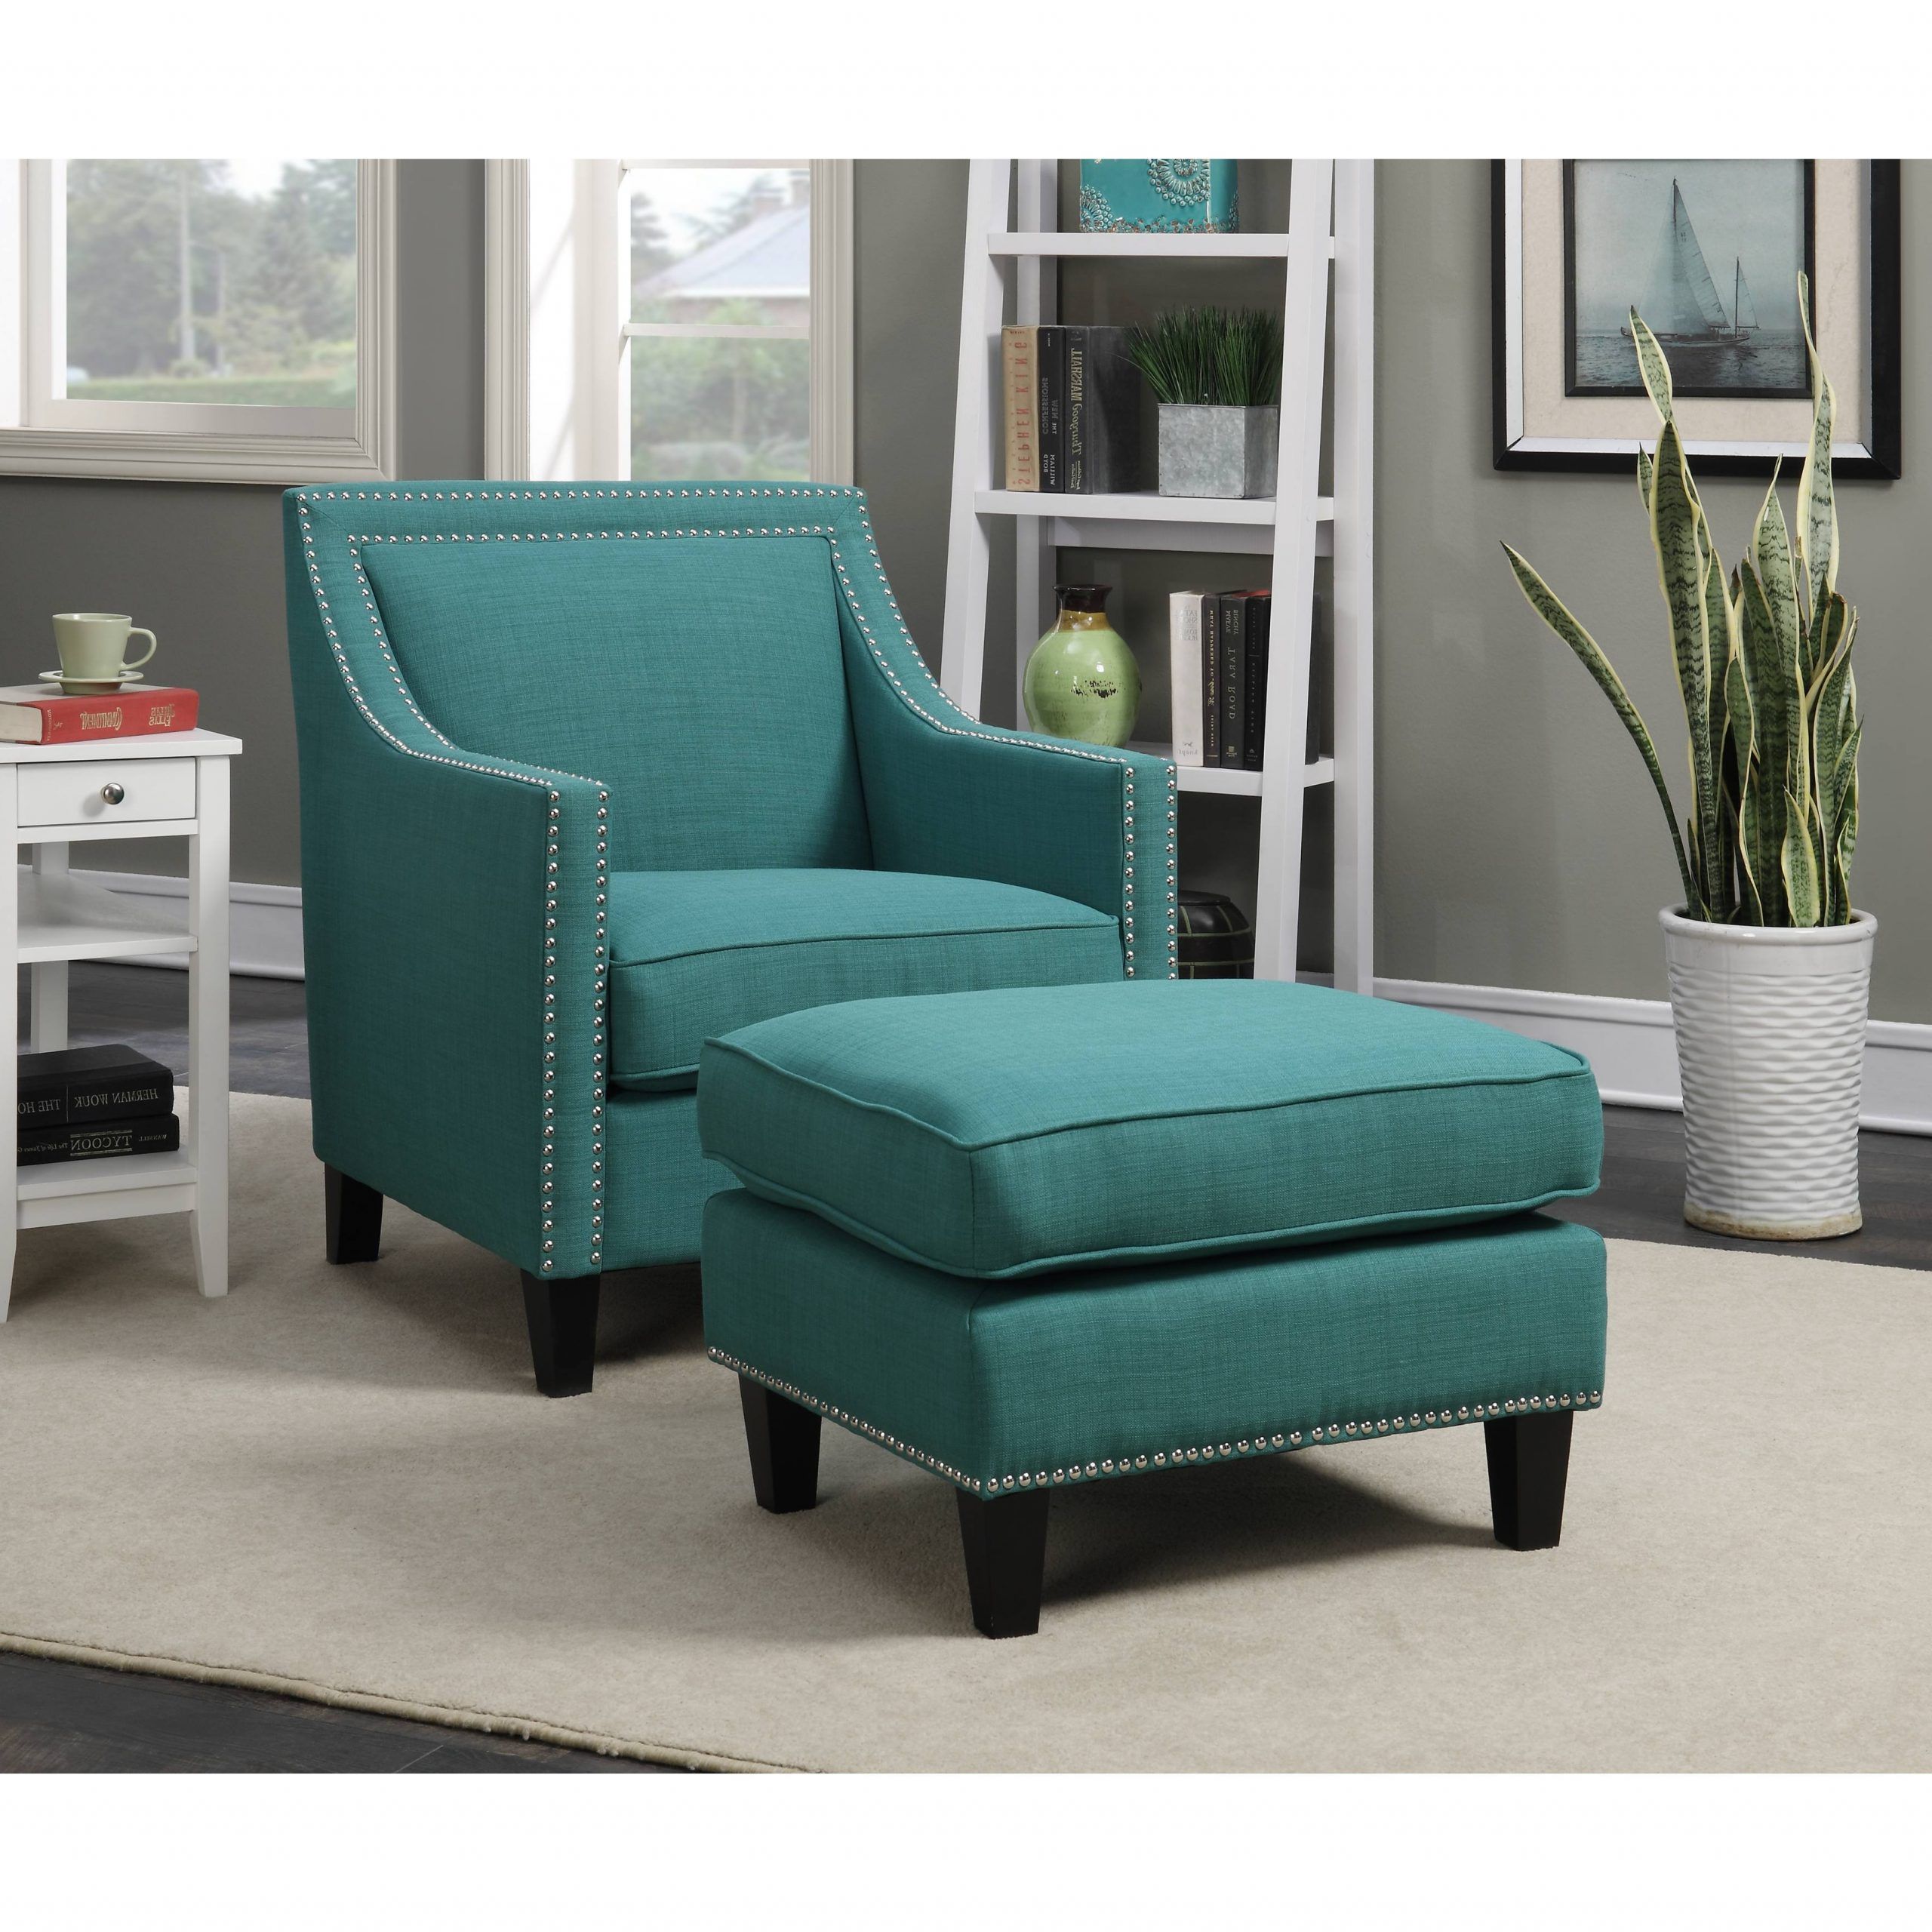 Well Known Modern Armchairs And Ottoman Intended For Copper Grove Thorsen Contemporary Teal Armchair & Ottoman Set (View 1 of 20)